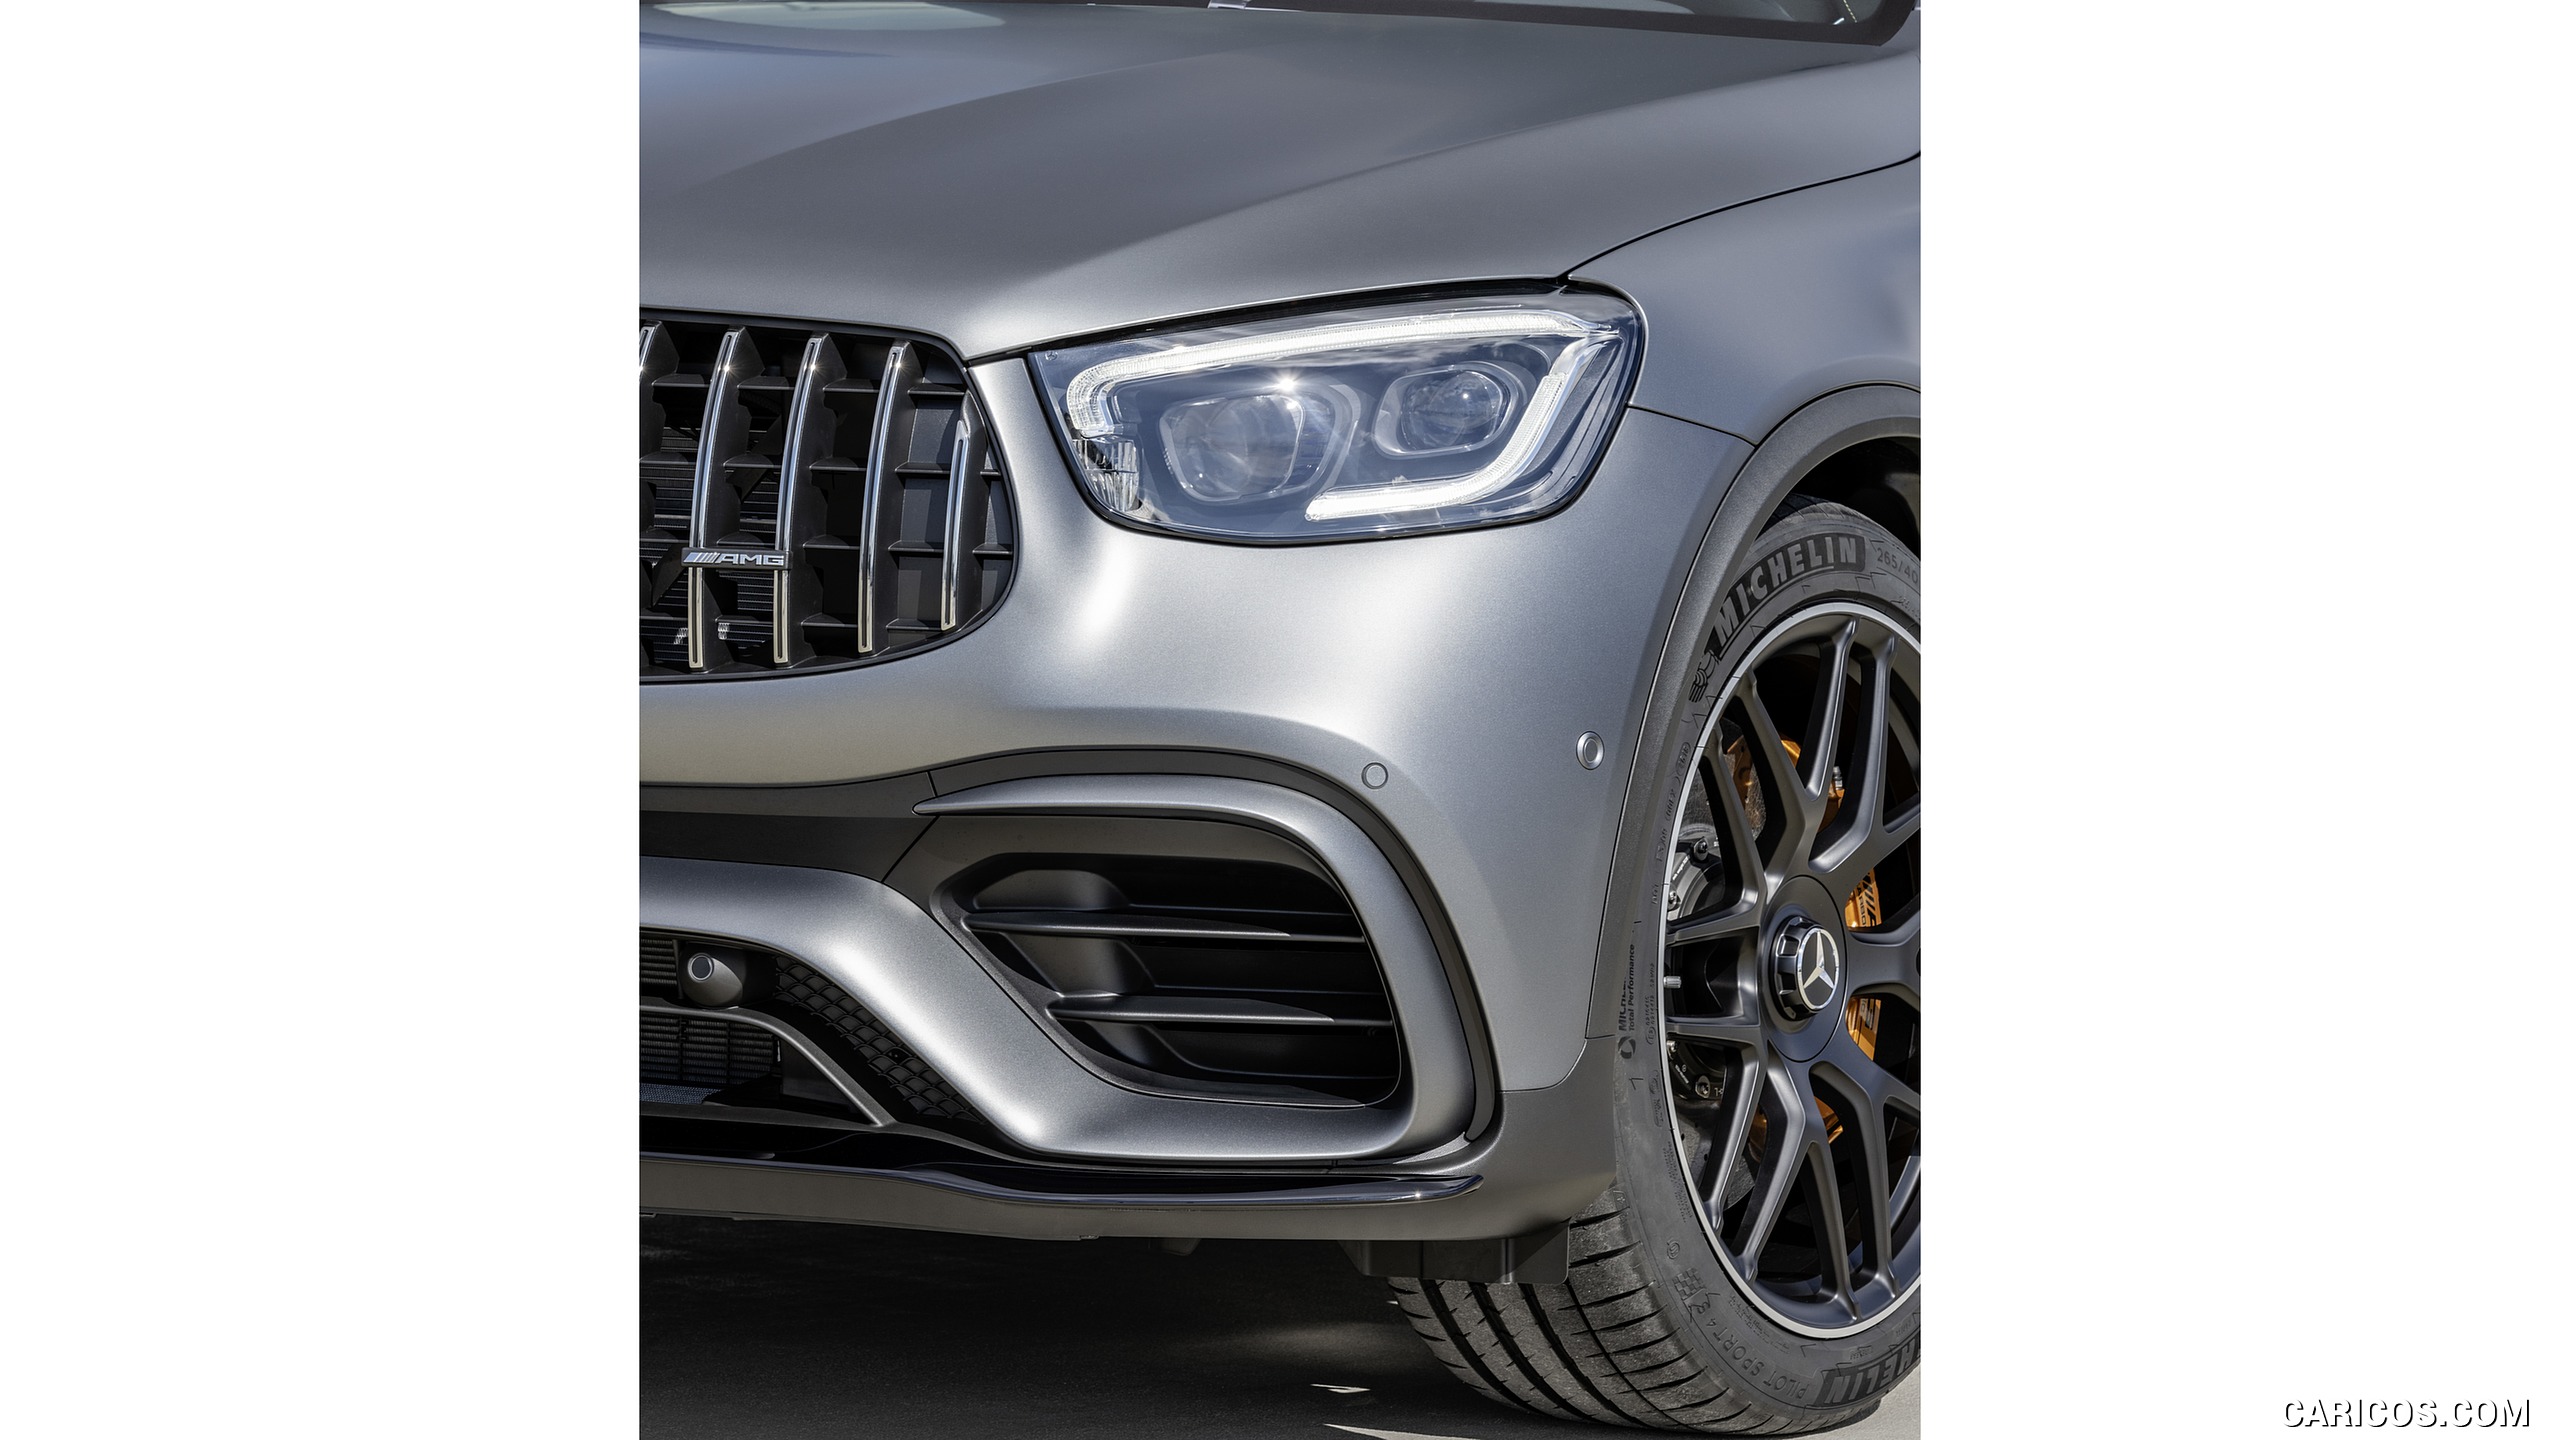 2020 Mercedes-AMG GLC 63 S 4MATIC+ Coupe - Headlight, #12 of 102